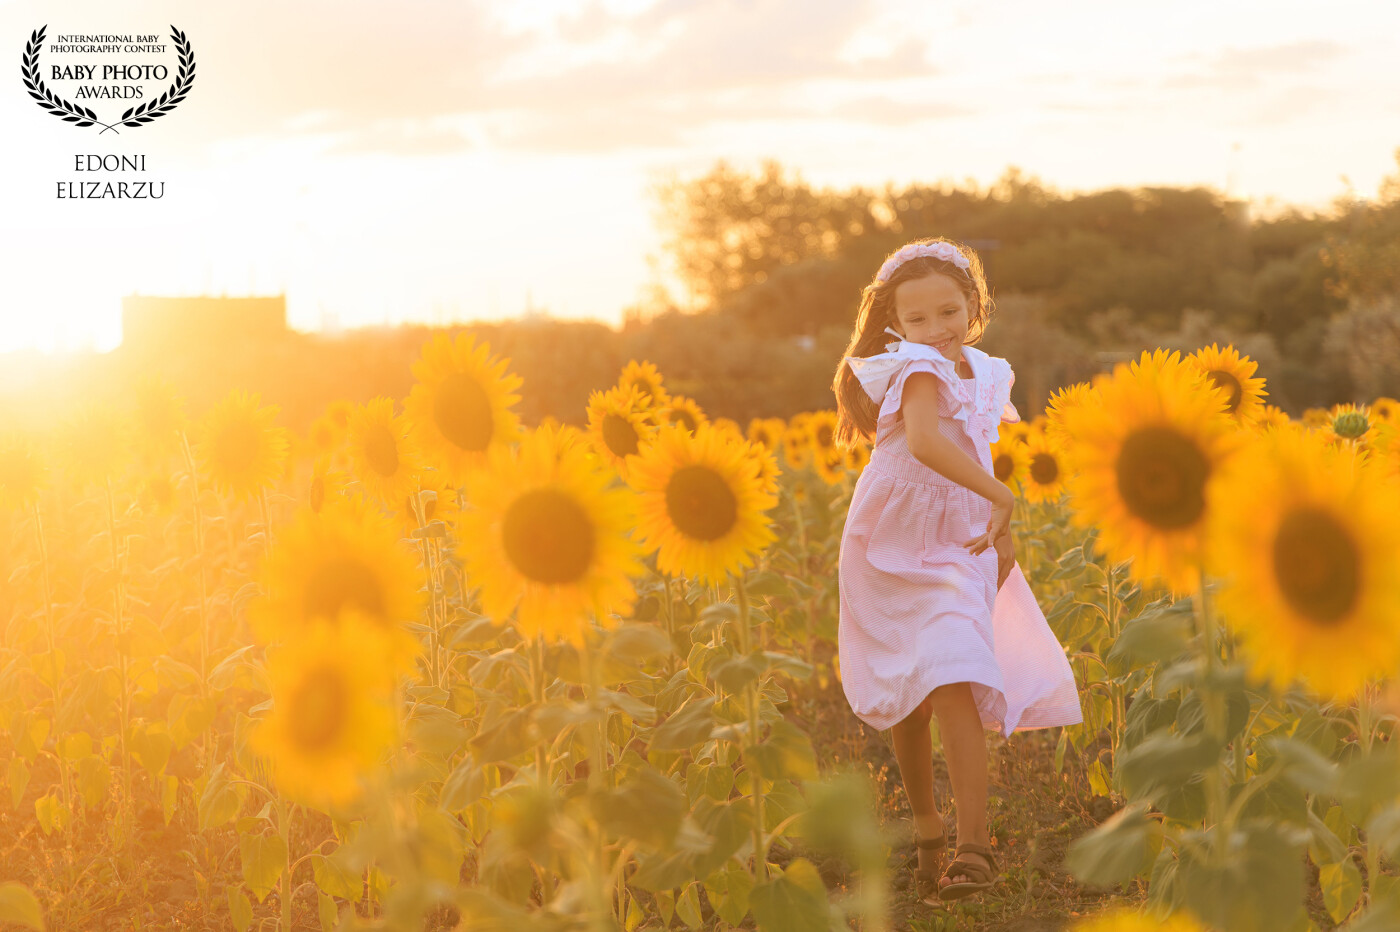 My Little girl running among the sunflowers! Love this location